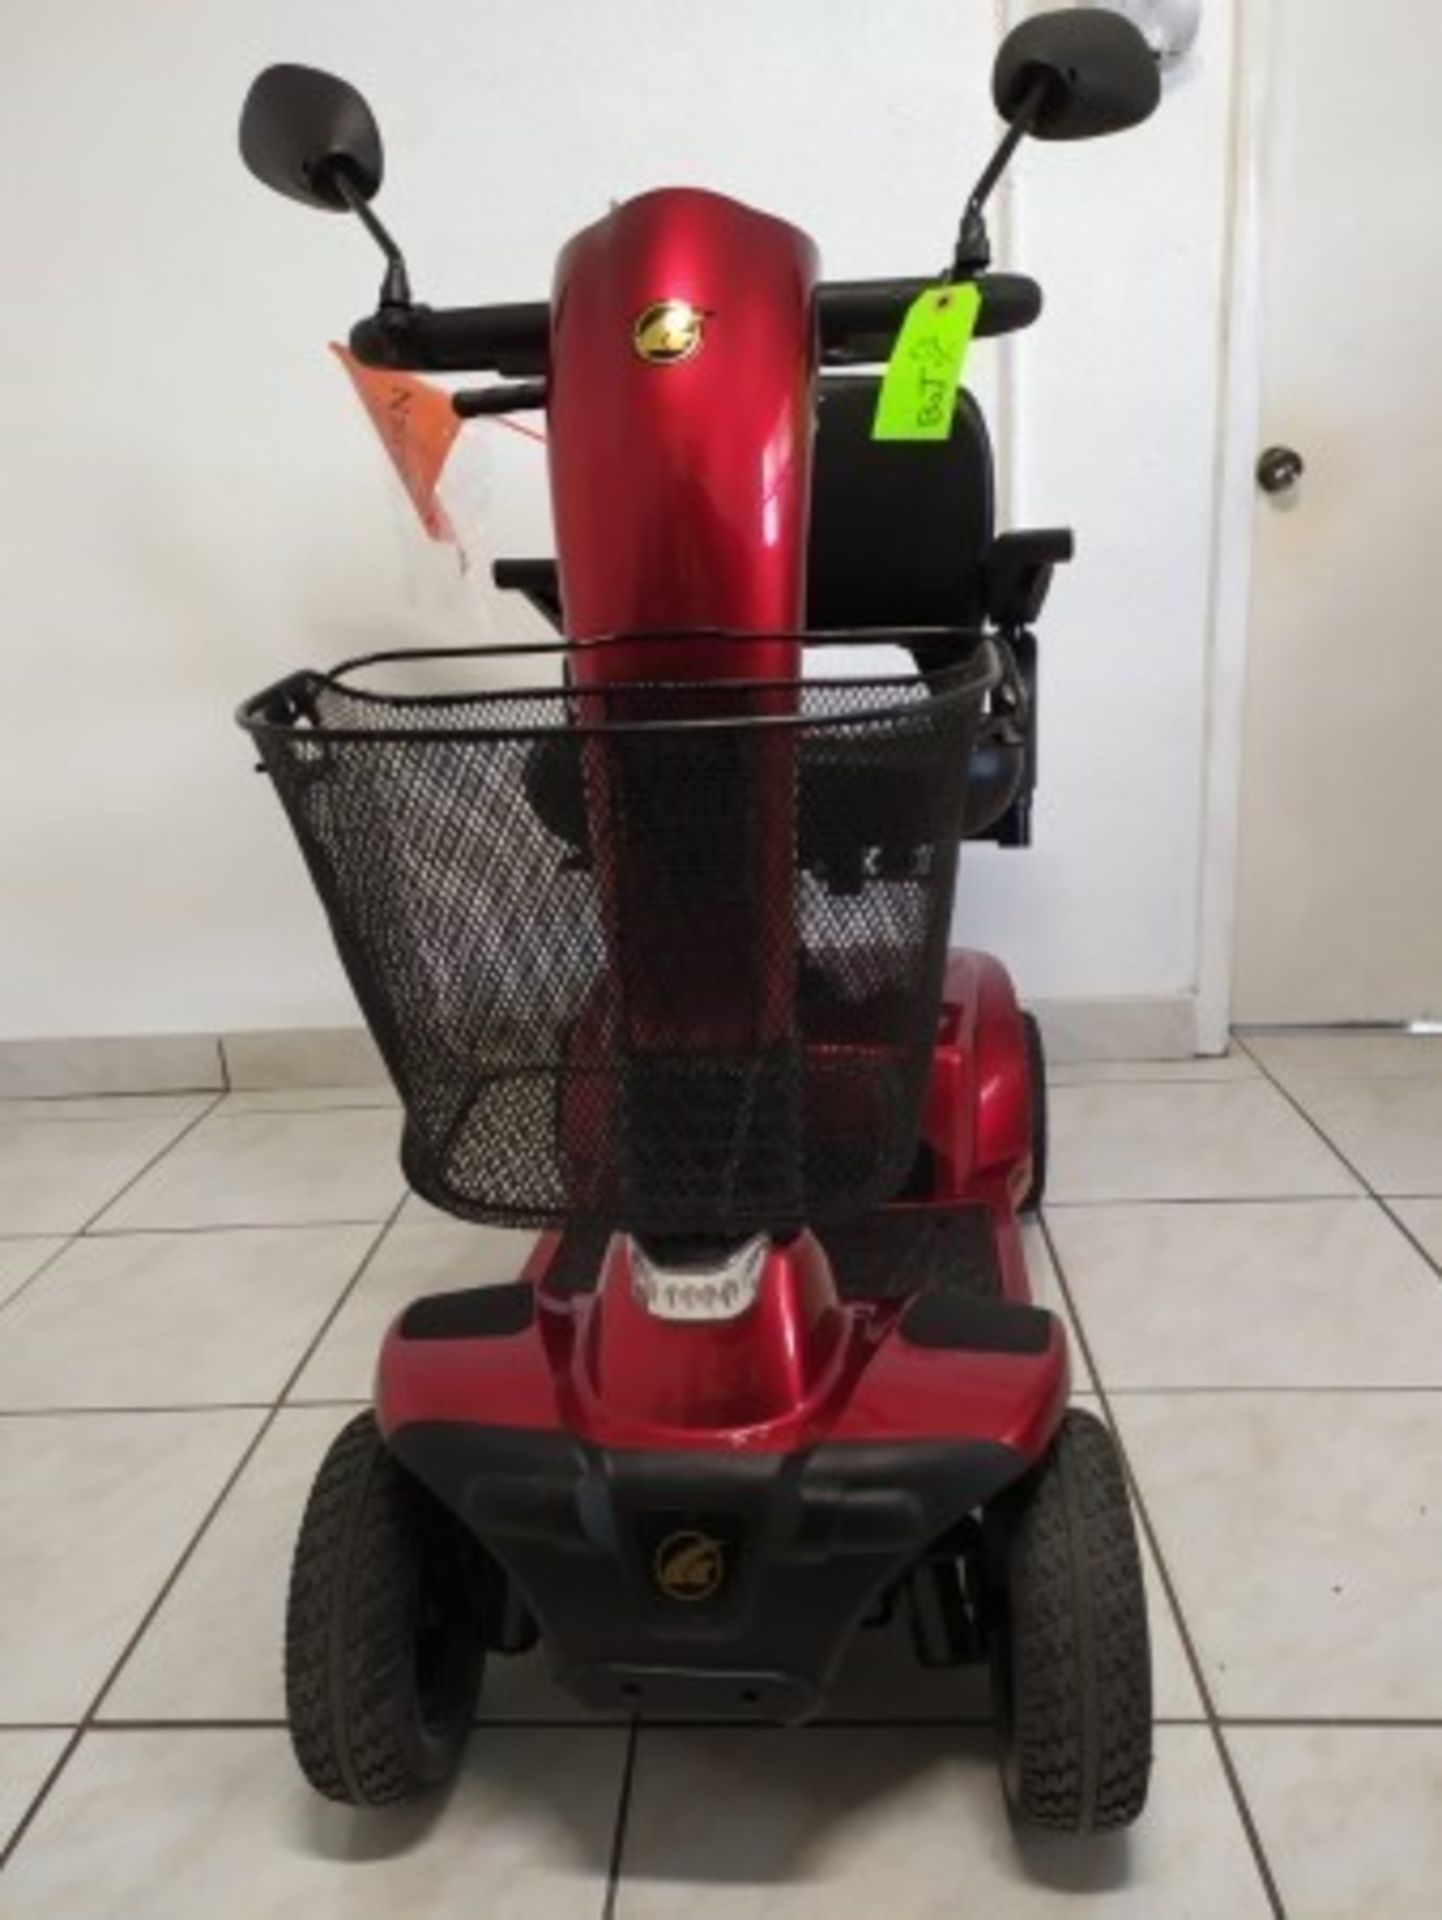 2017 GOLDEN COMPANION GC440 4-WHEEL SCOOTER WITH CHARGER, BASKET & COVER - RED - 400LB CAPACITY - SE